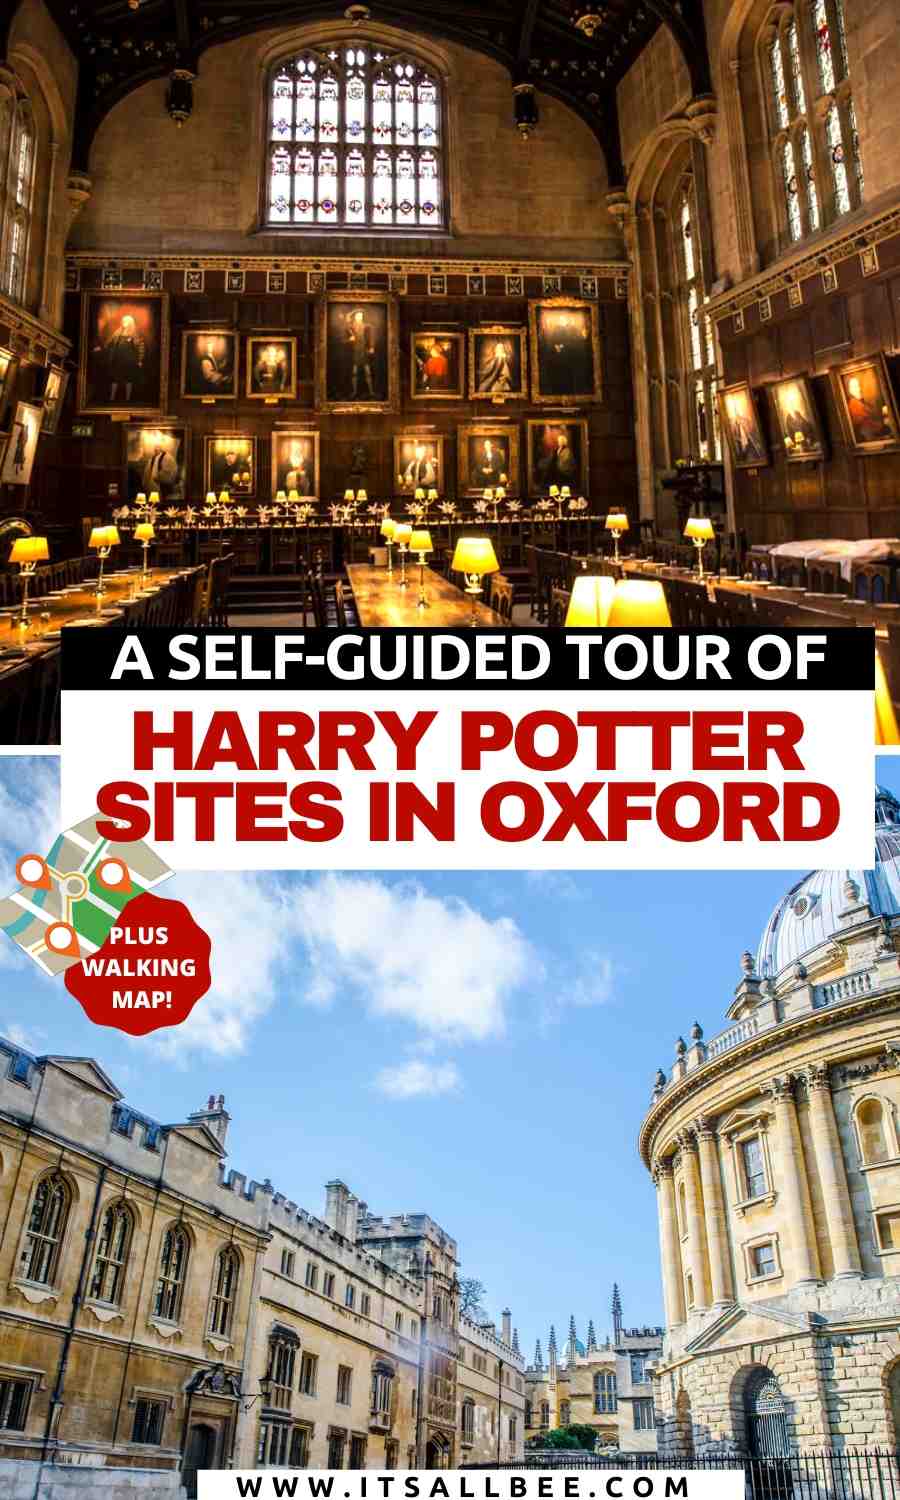  Harry Potter locations in Oxford | harry potter dining hall